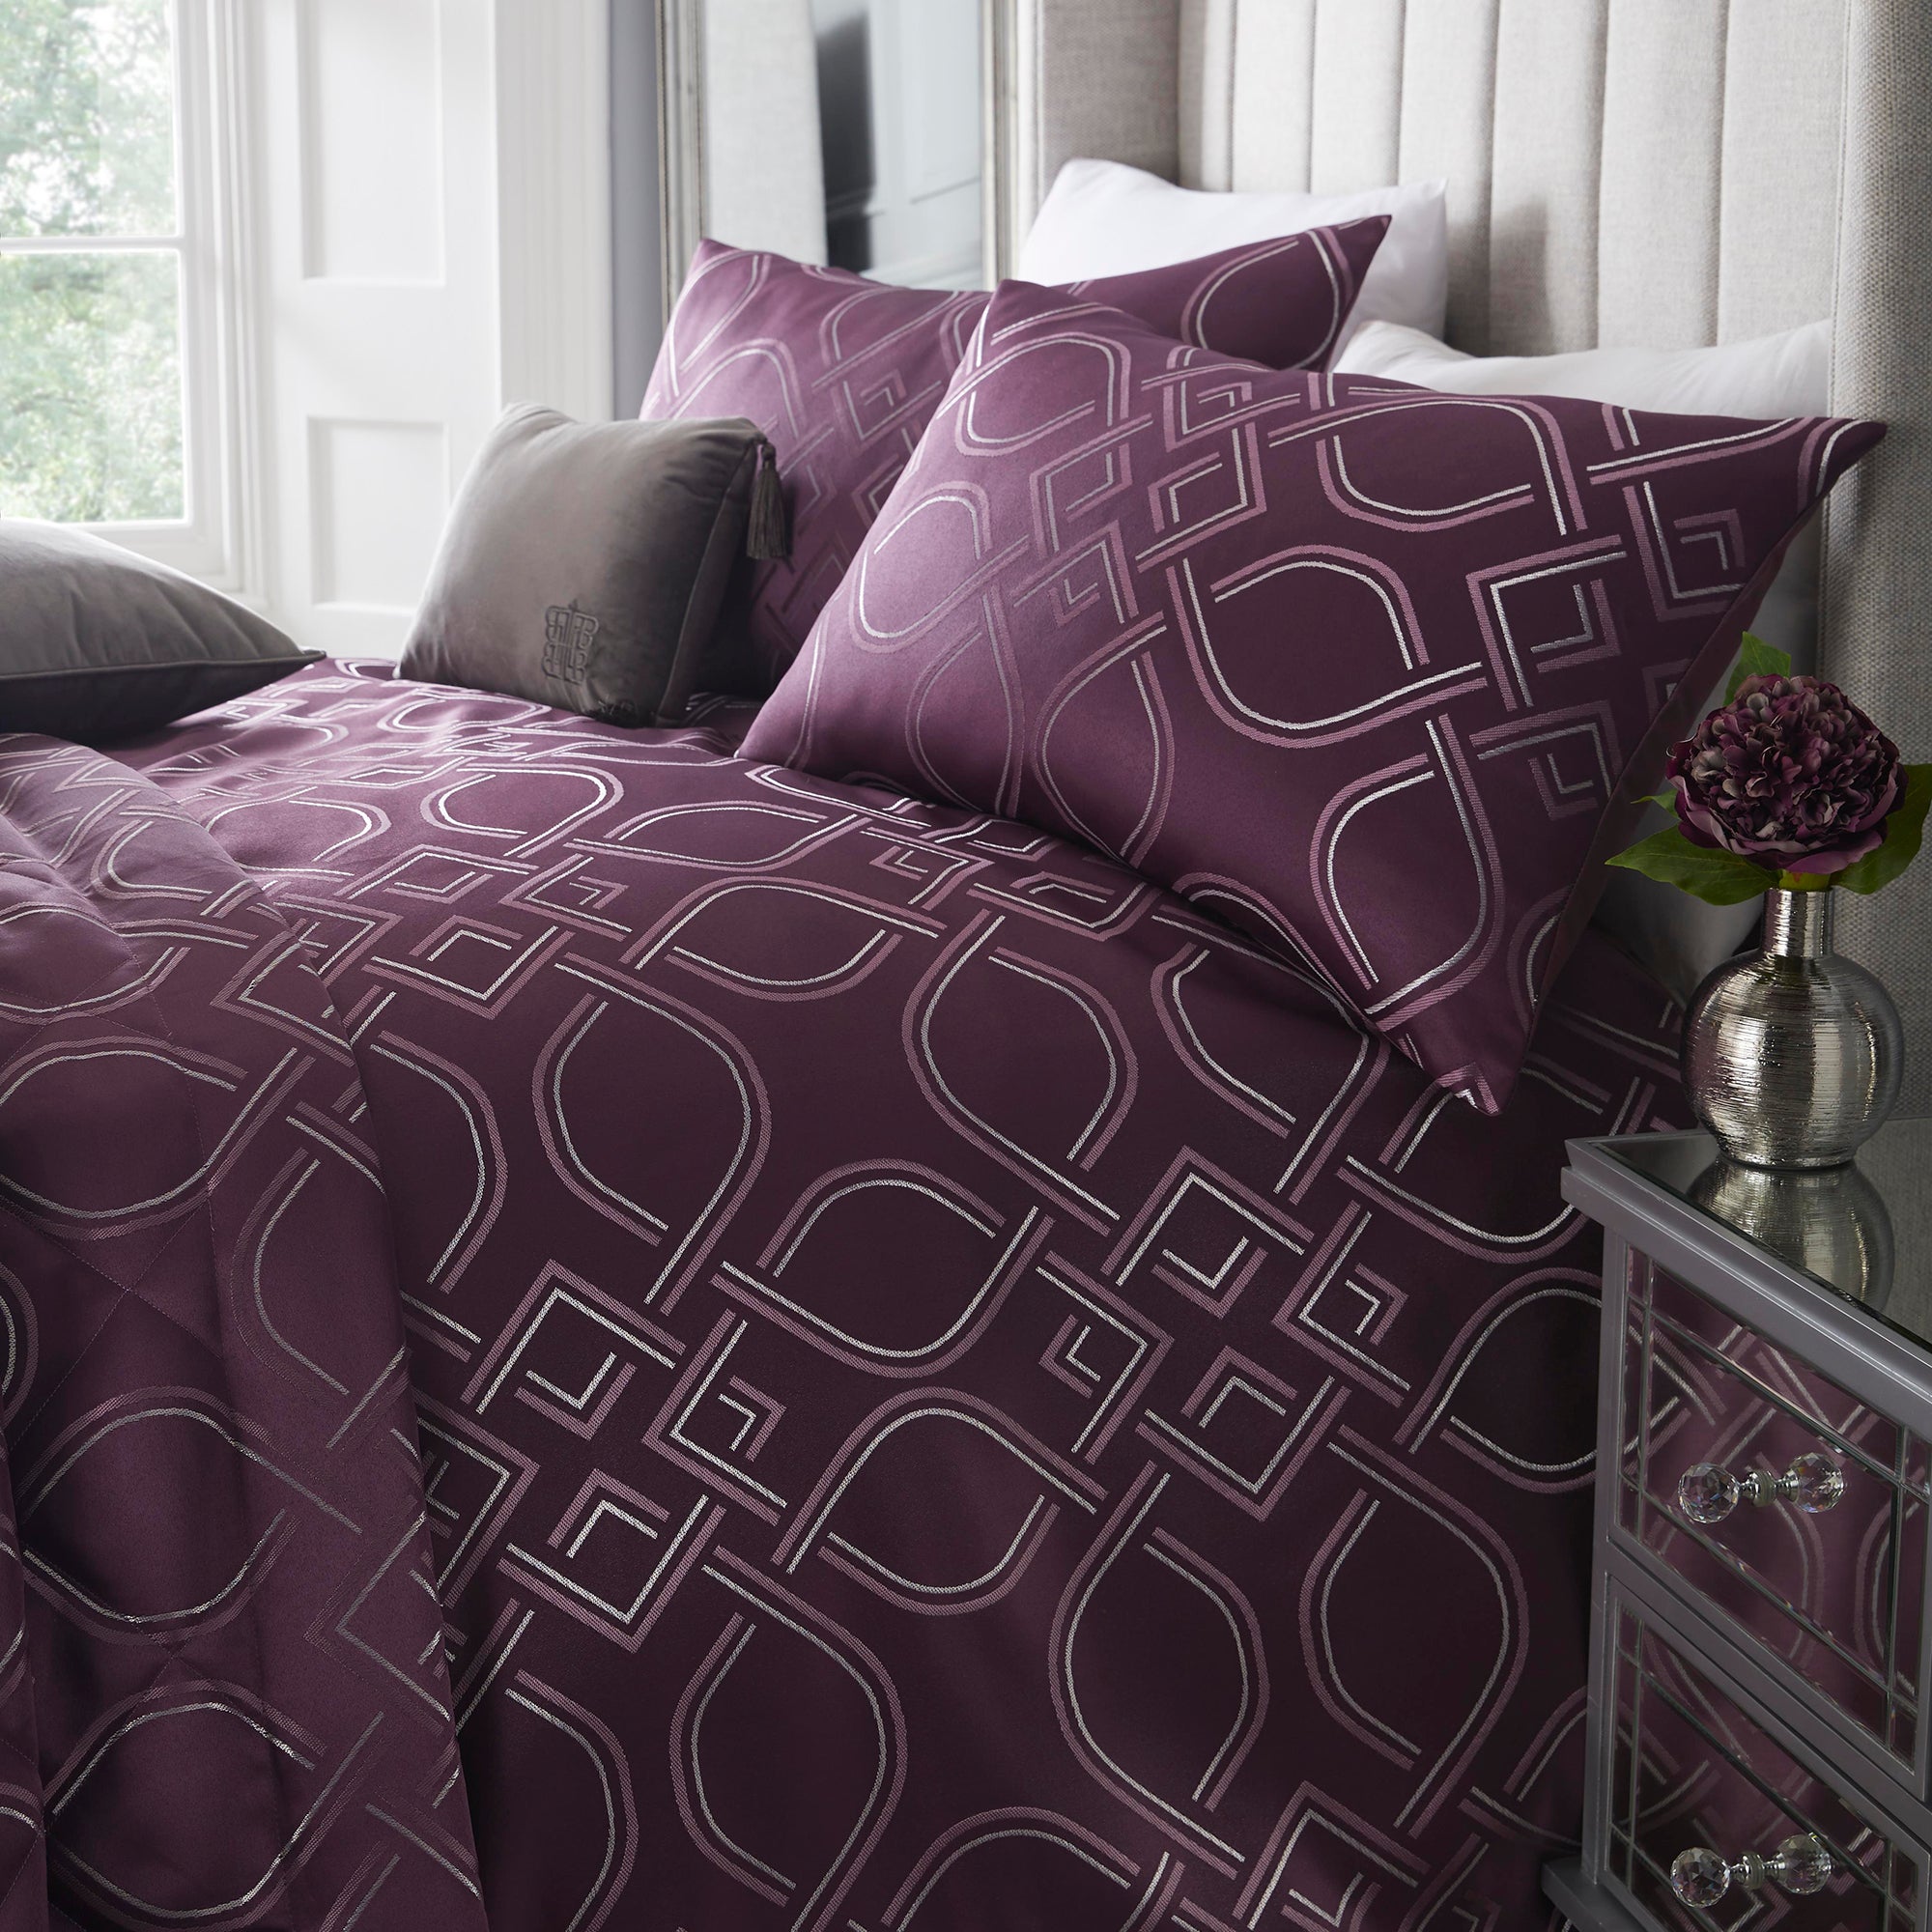 Tie the Knot Luxe - Metallic Jacquard Duvet Cover Set in Damson & Silver - by Laurence Llewelyn-Bowen